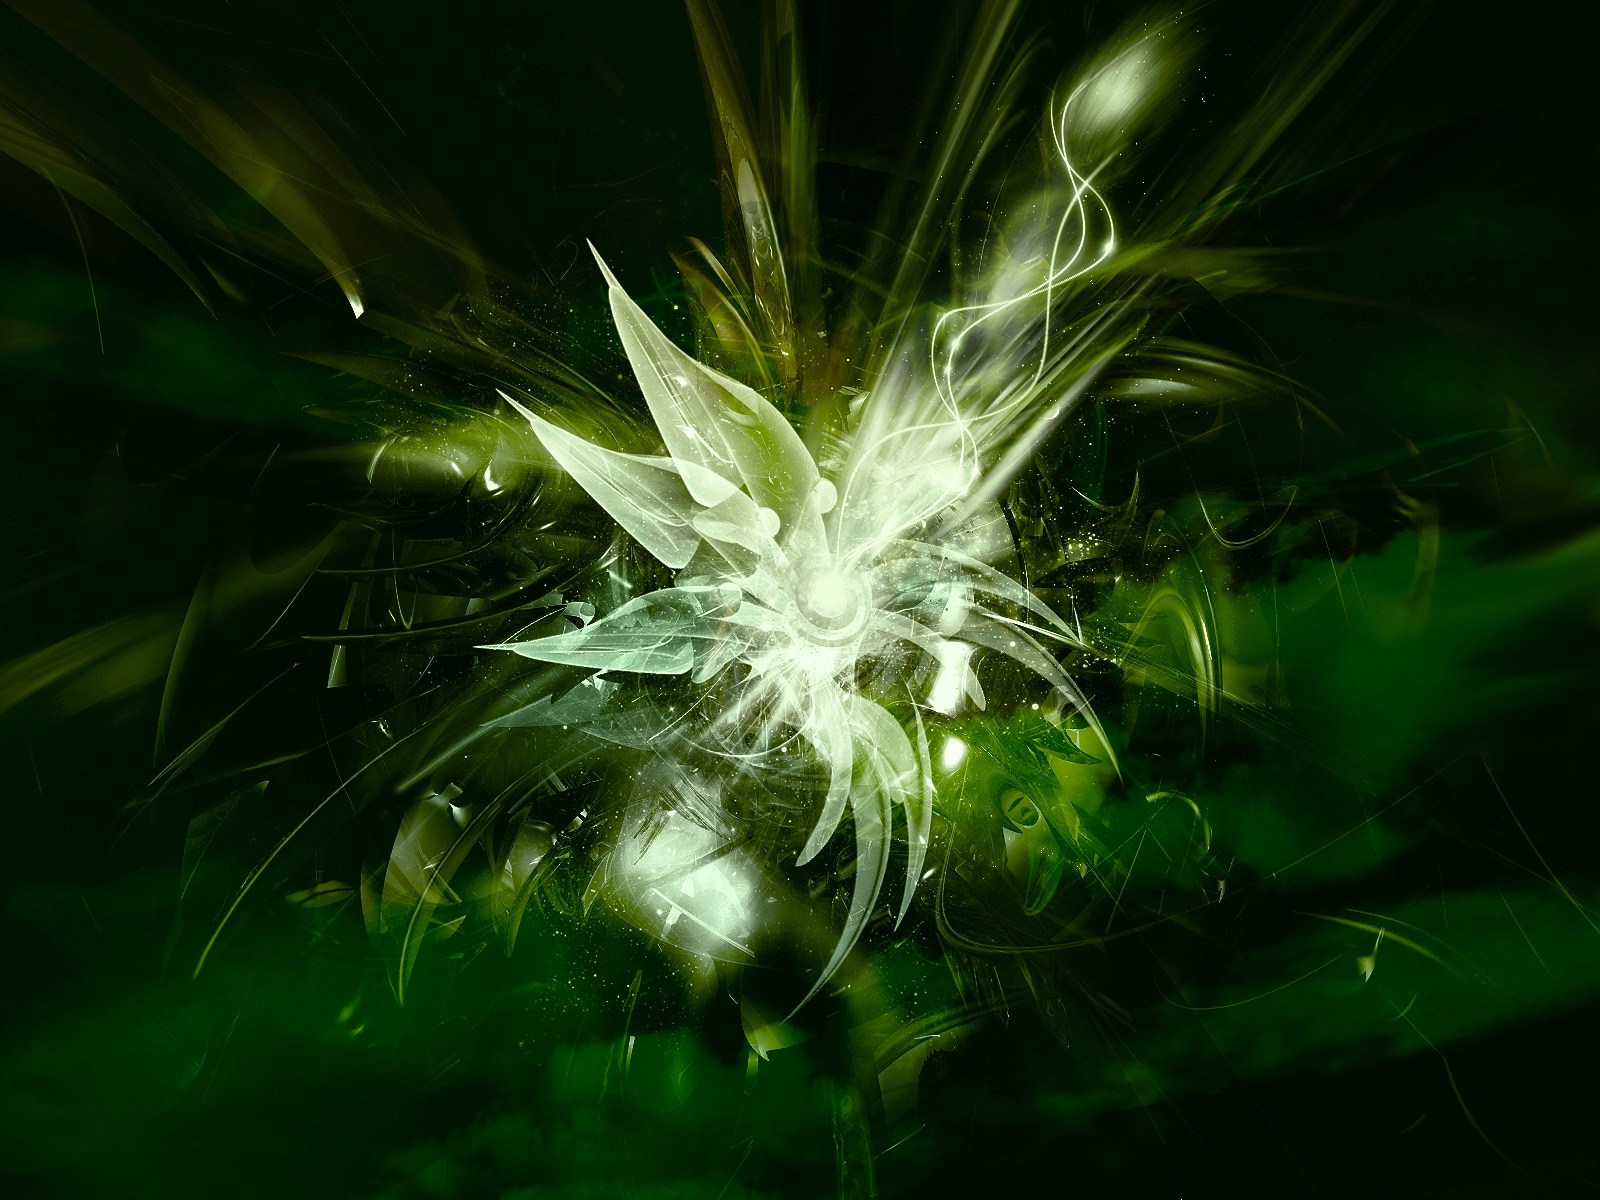 Abstract Texture Green 1600x1200